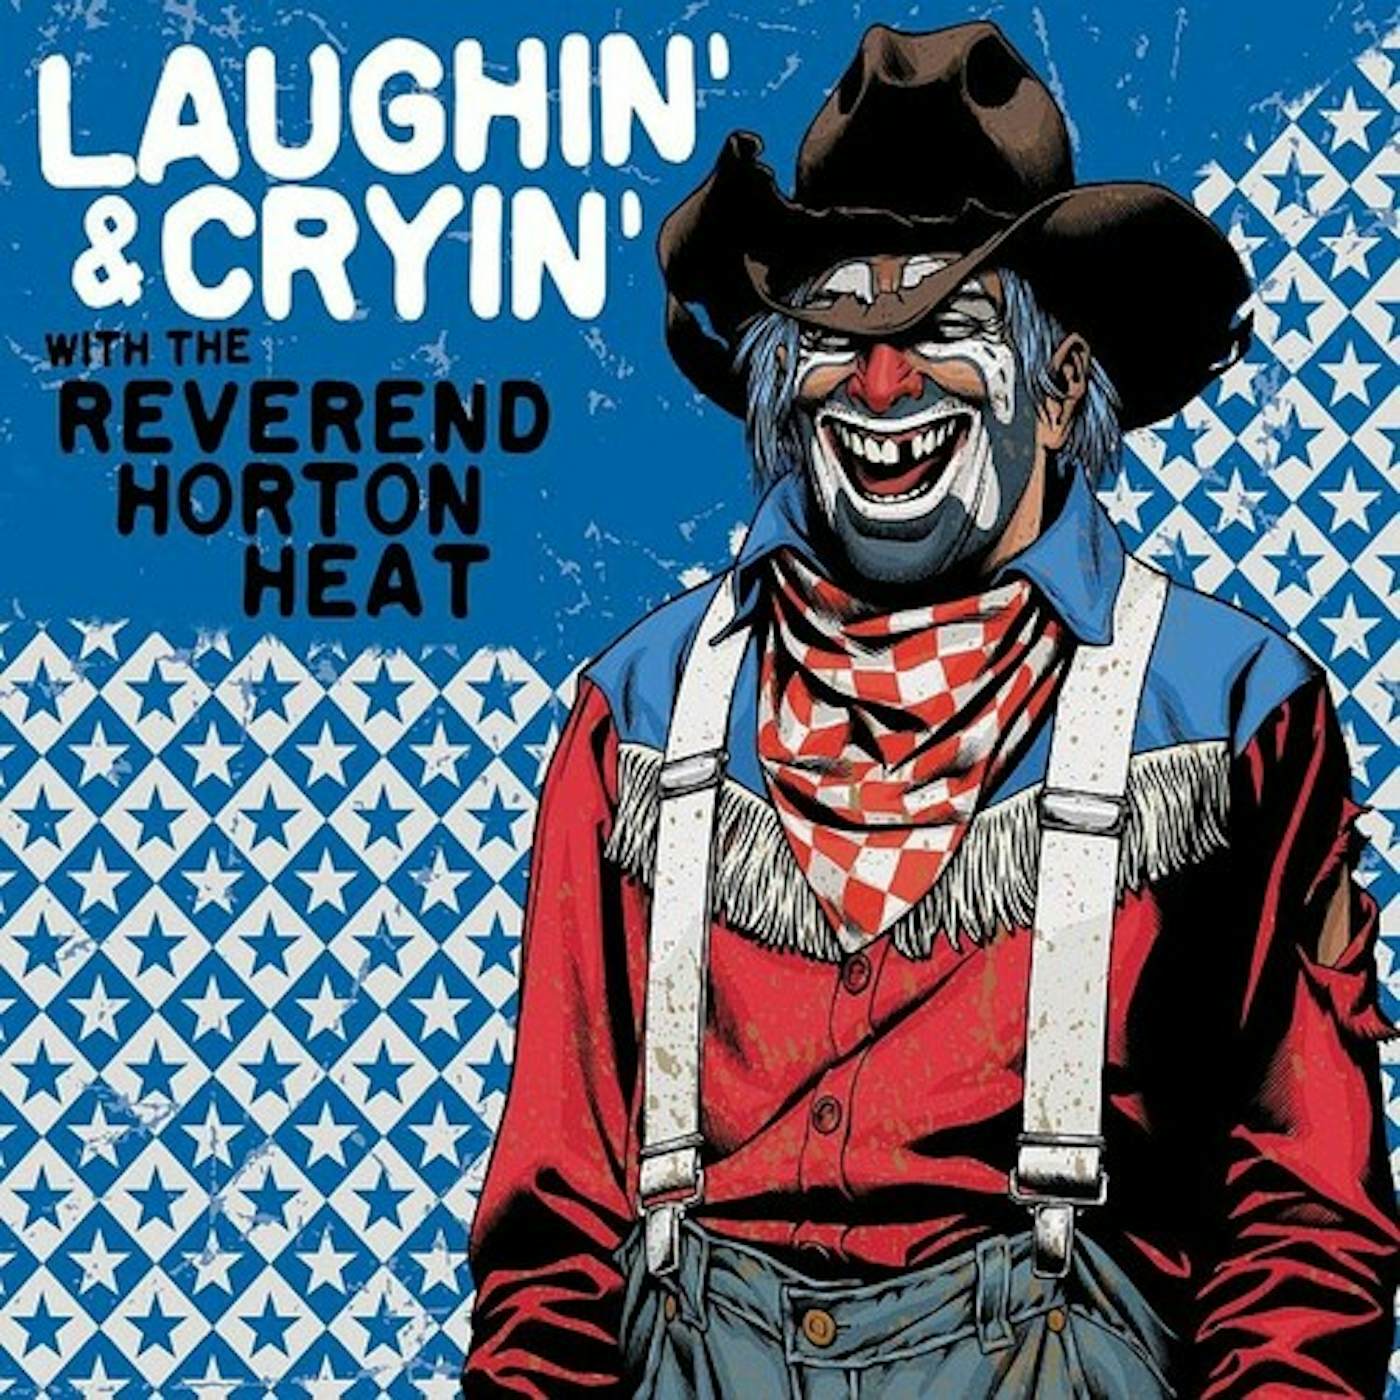 Laughin' & Cryin' With The Reverend Horton Heat Vinyl Record